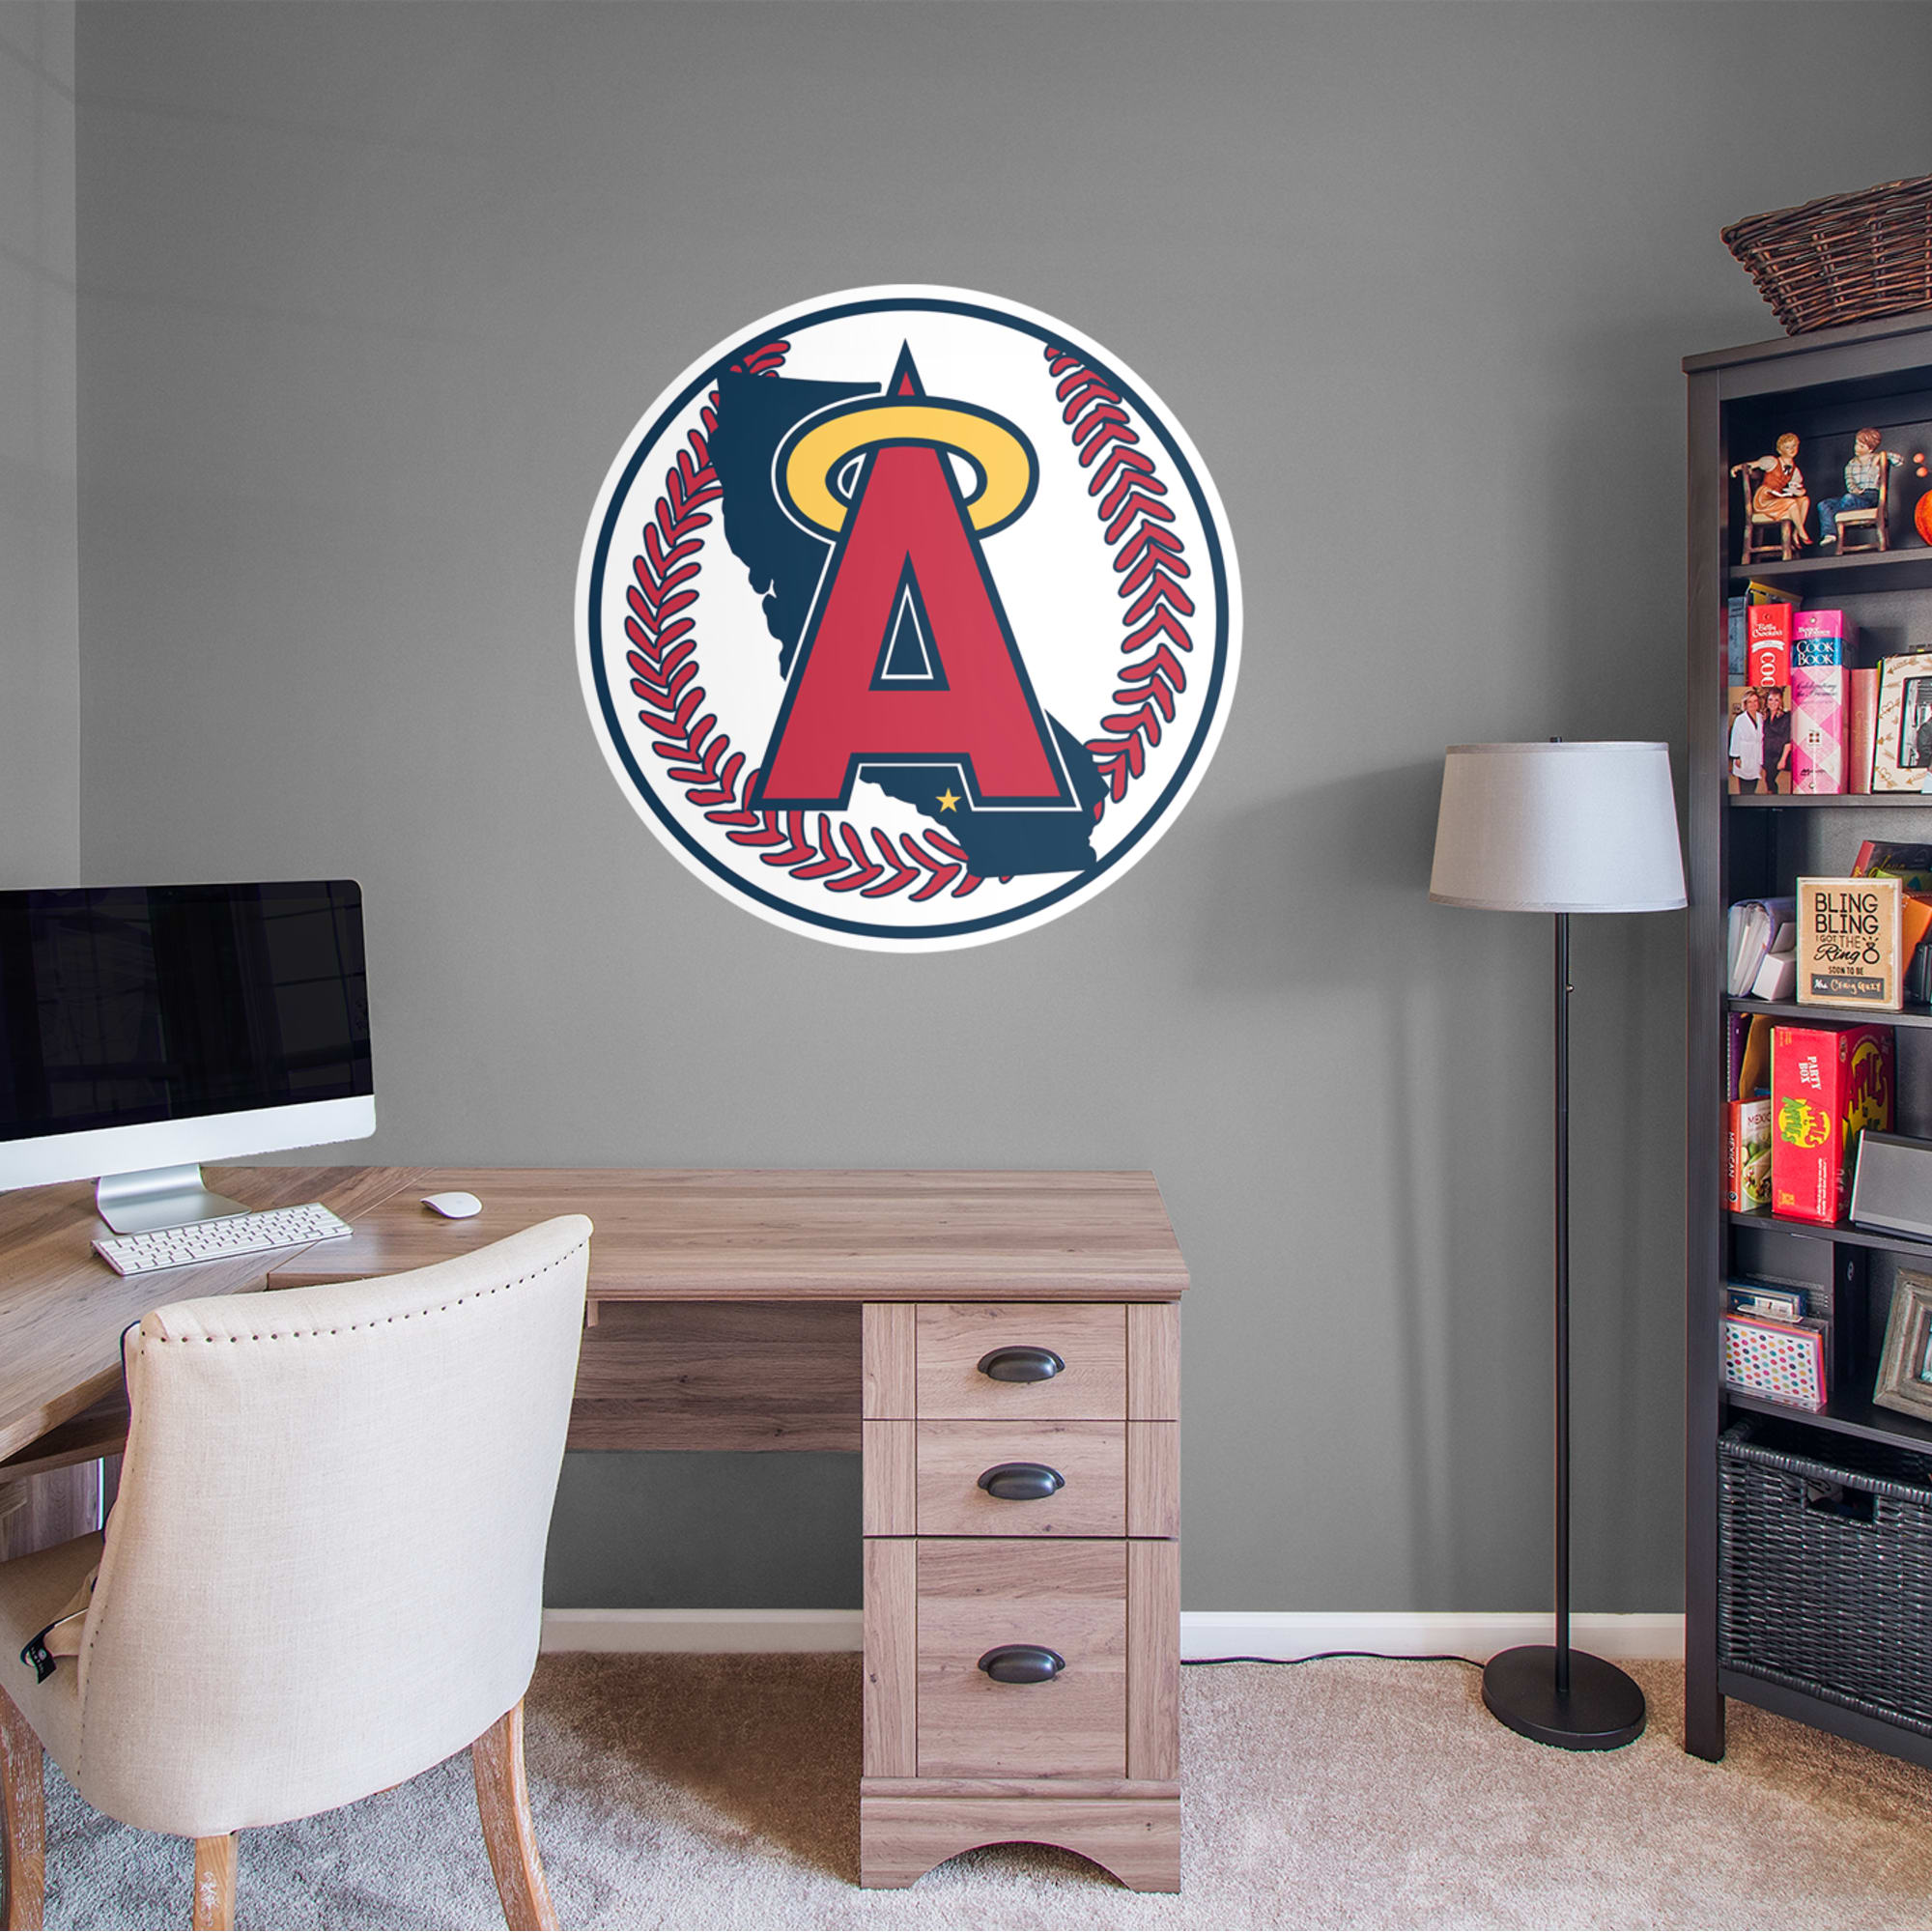 Los Angeles Angels for LA Angels: Classic Logo - Officially Licensed MLB Removable Wall Decal 37.0"W x 37.0"H by Fathead | Vinyl